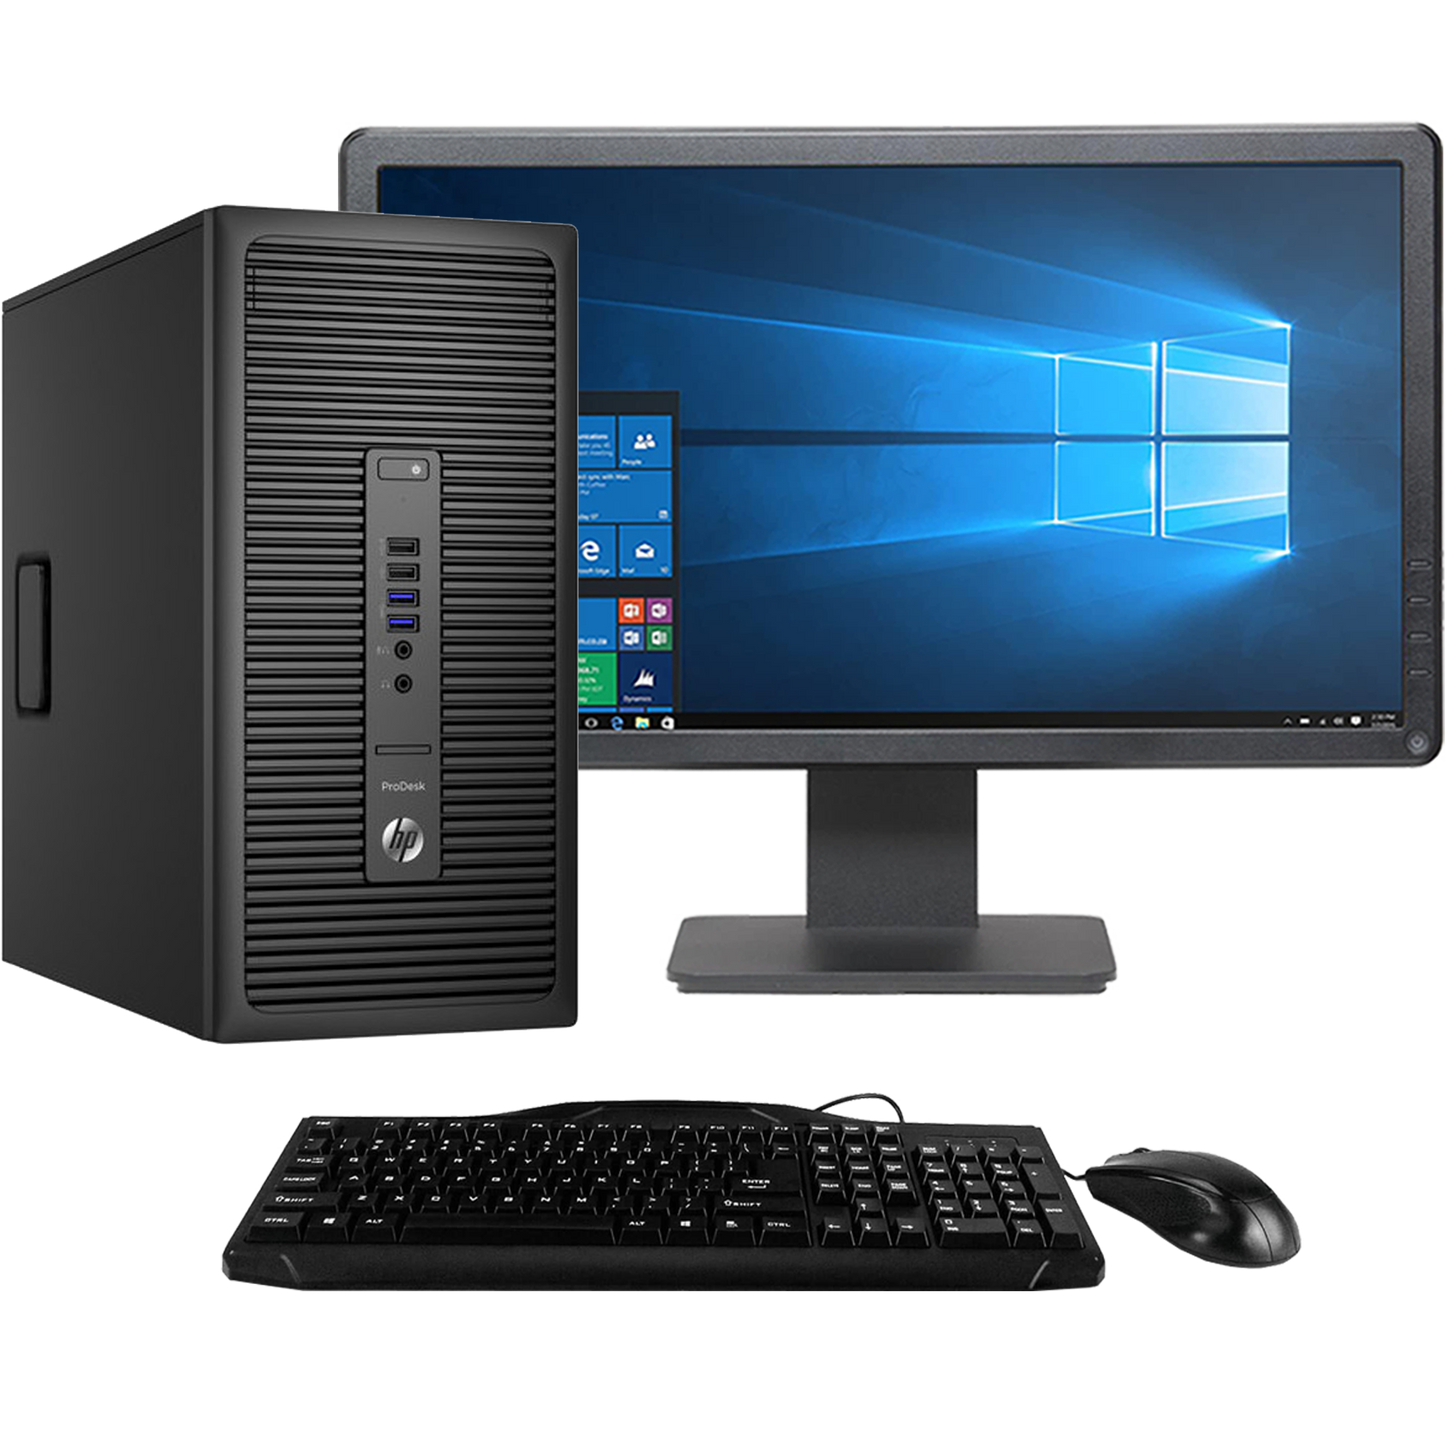 HP ProDesk 600 G1 Intel Core i5, 4th Gen Tower PC with 19" Monitor Desktop Computers